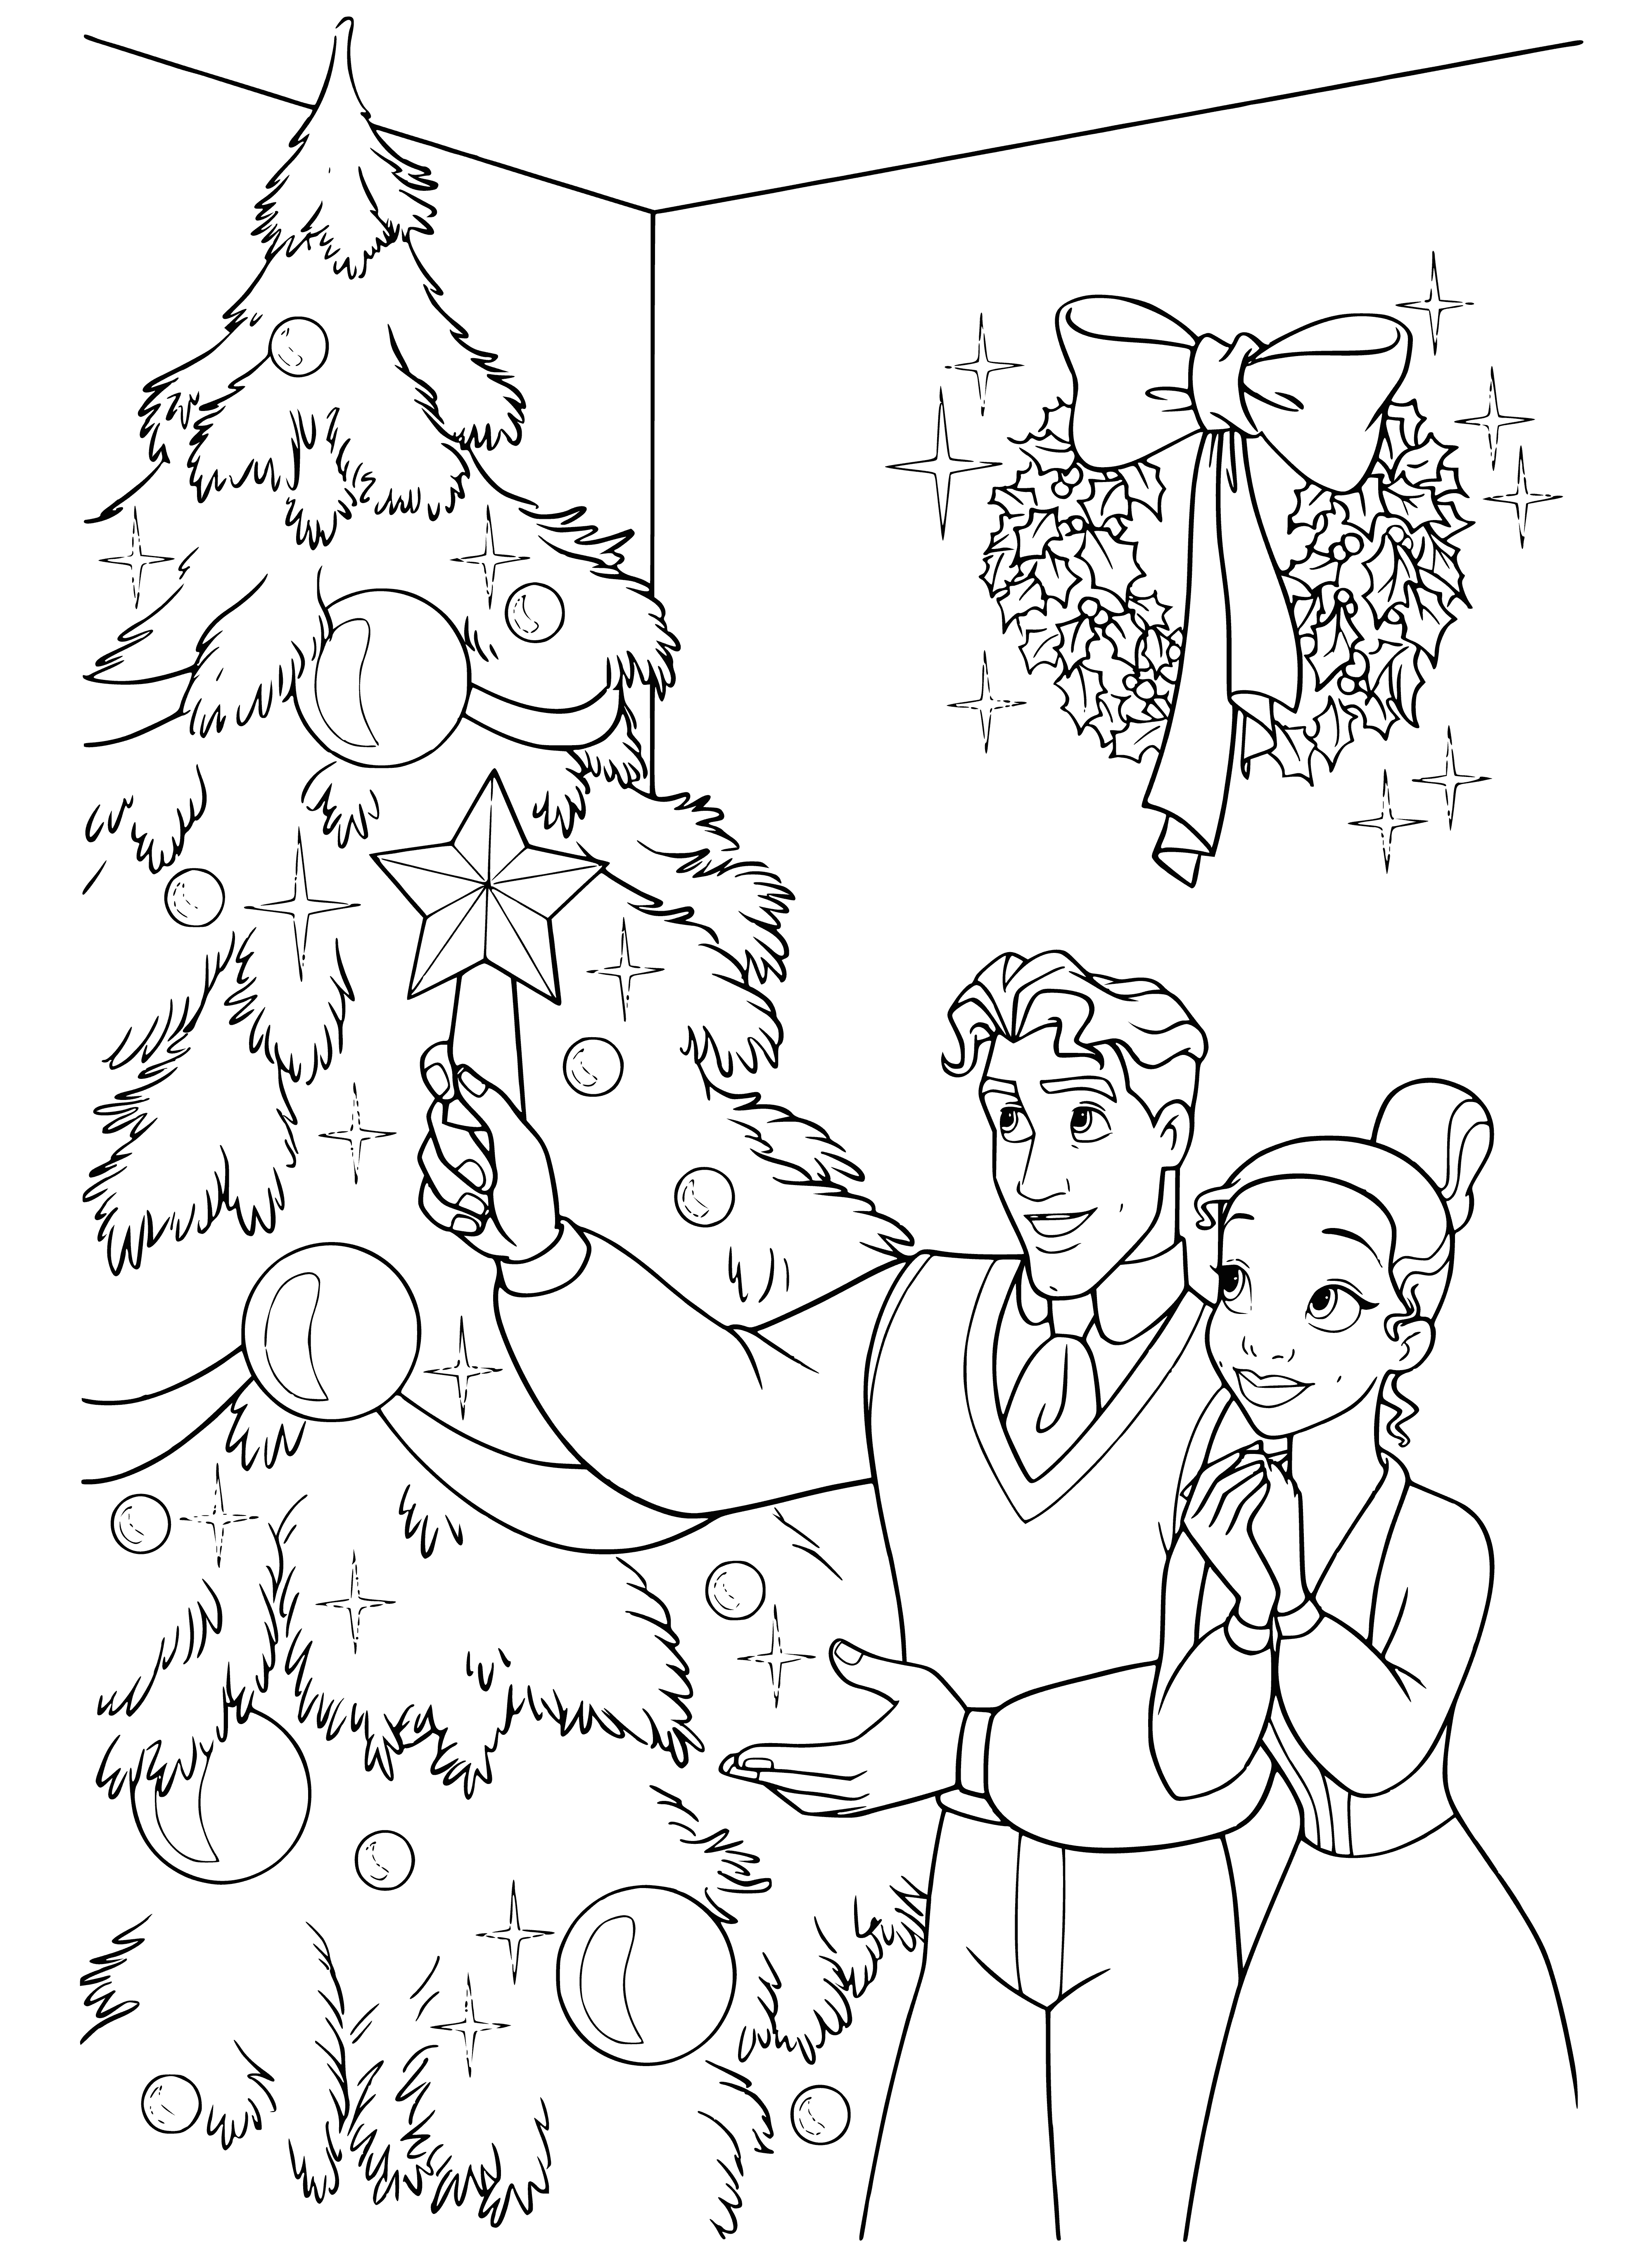 Tiana and the prince at the Christmas tree coloring page